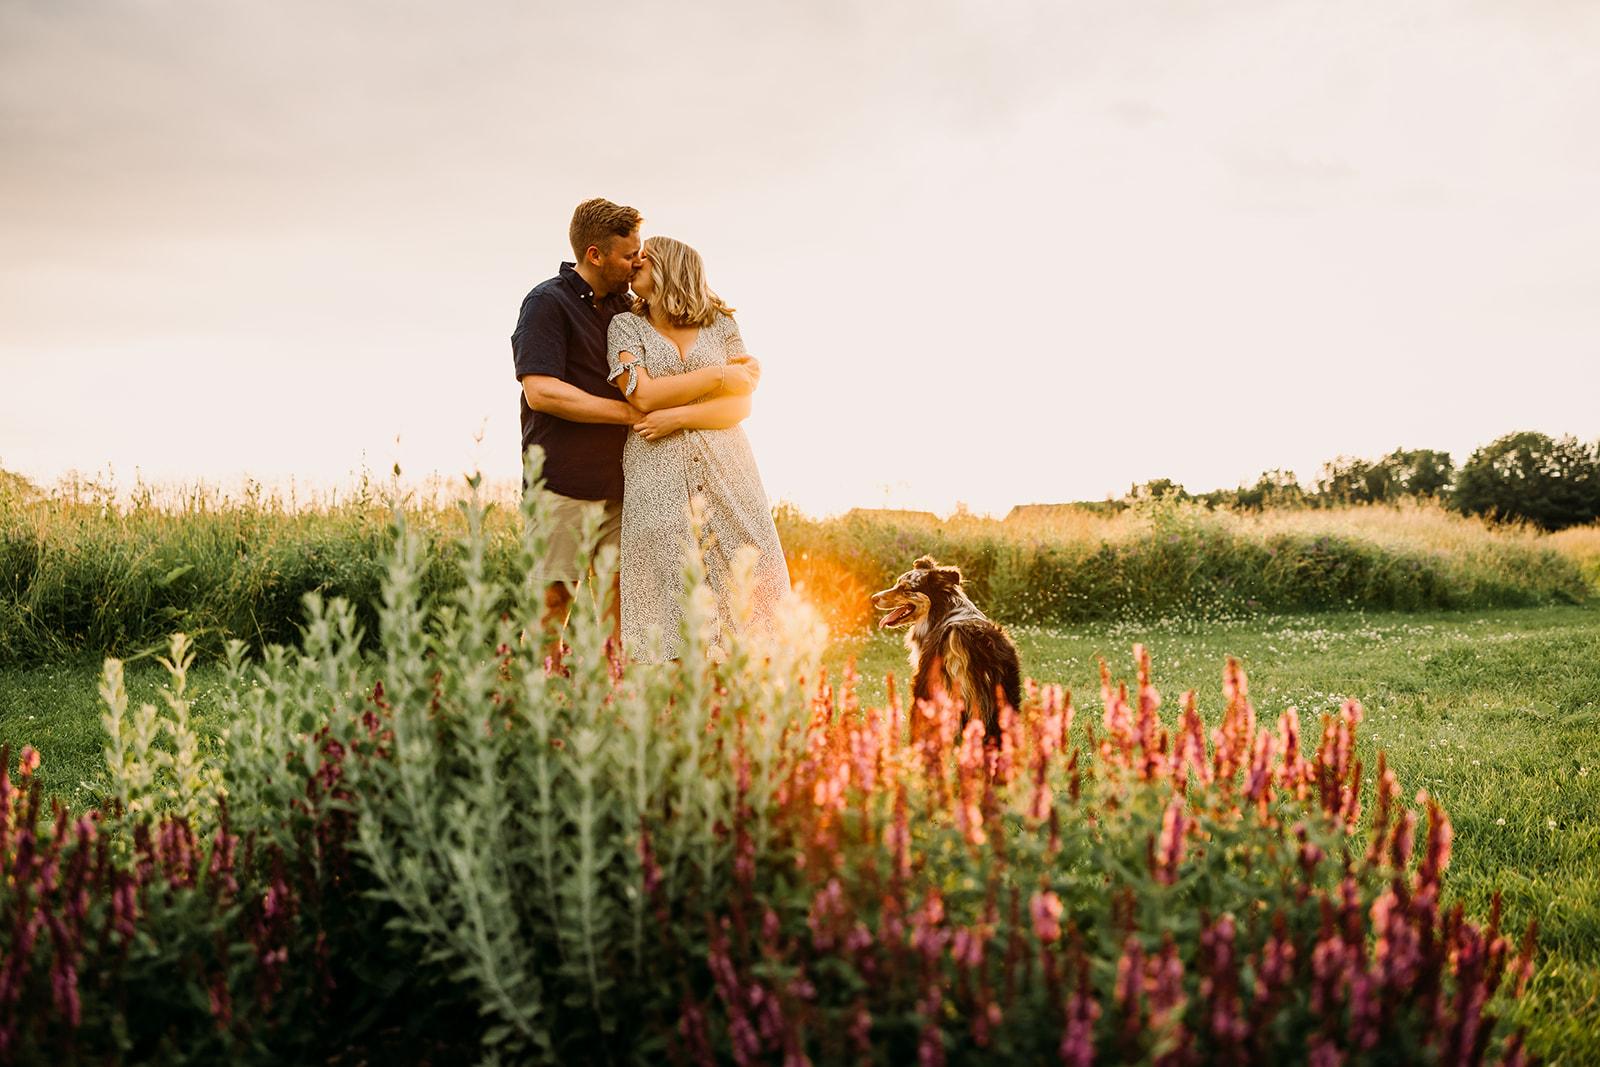 Couple's laughter fills the air in a whimsical engagement photoshoot in the field